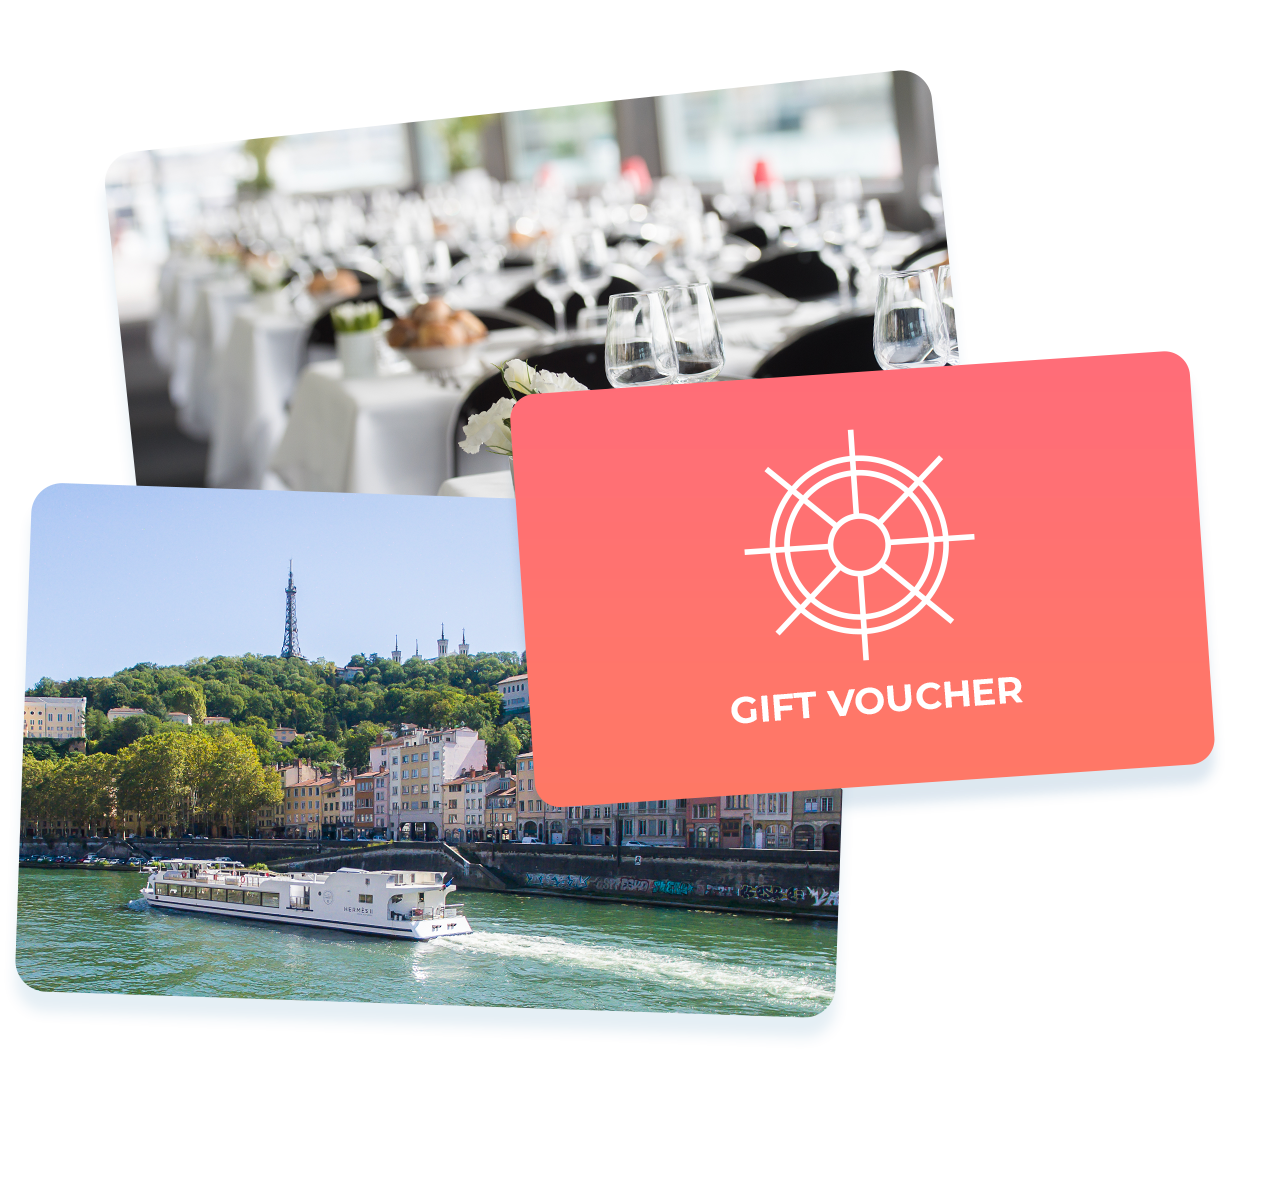  gift vouchers for boats in Lyon restaurant cruise 